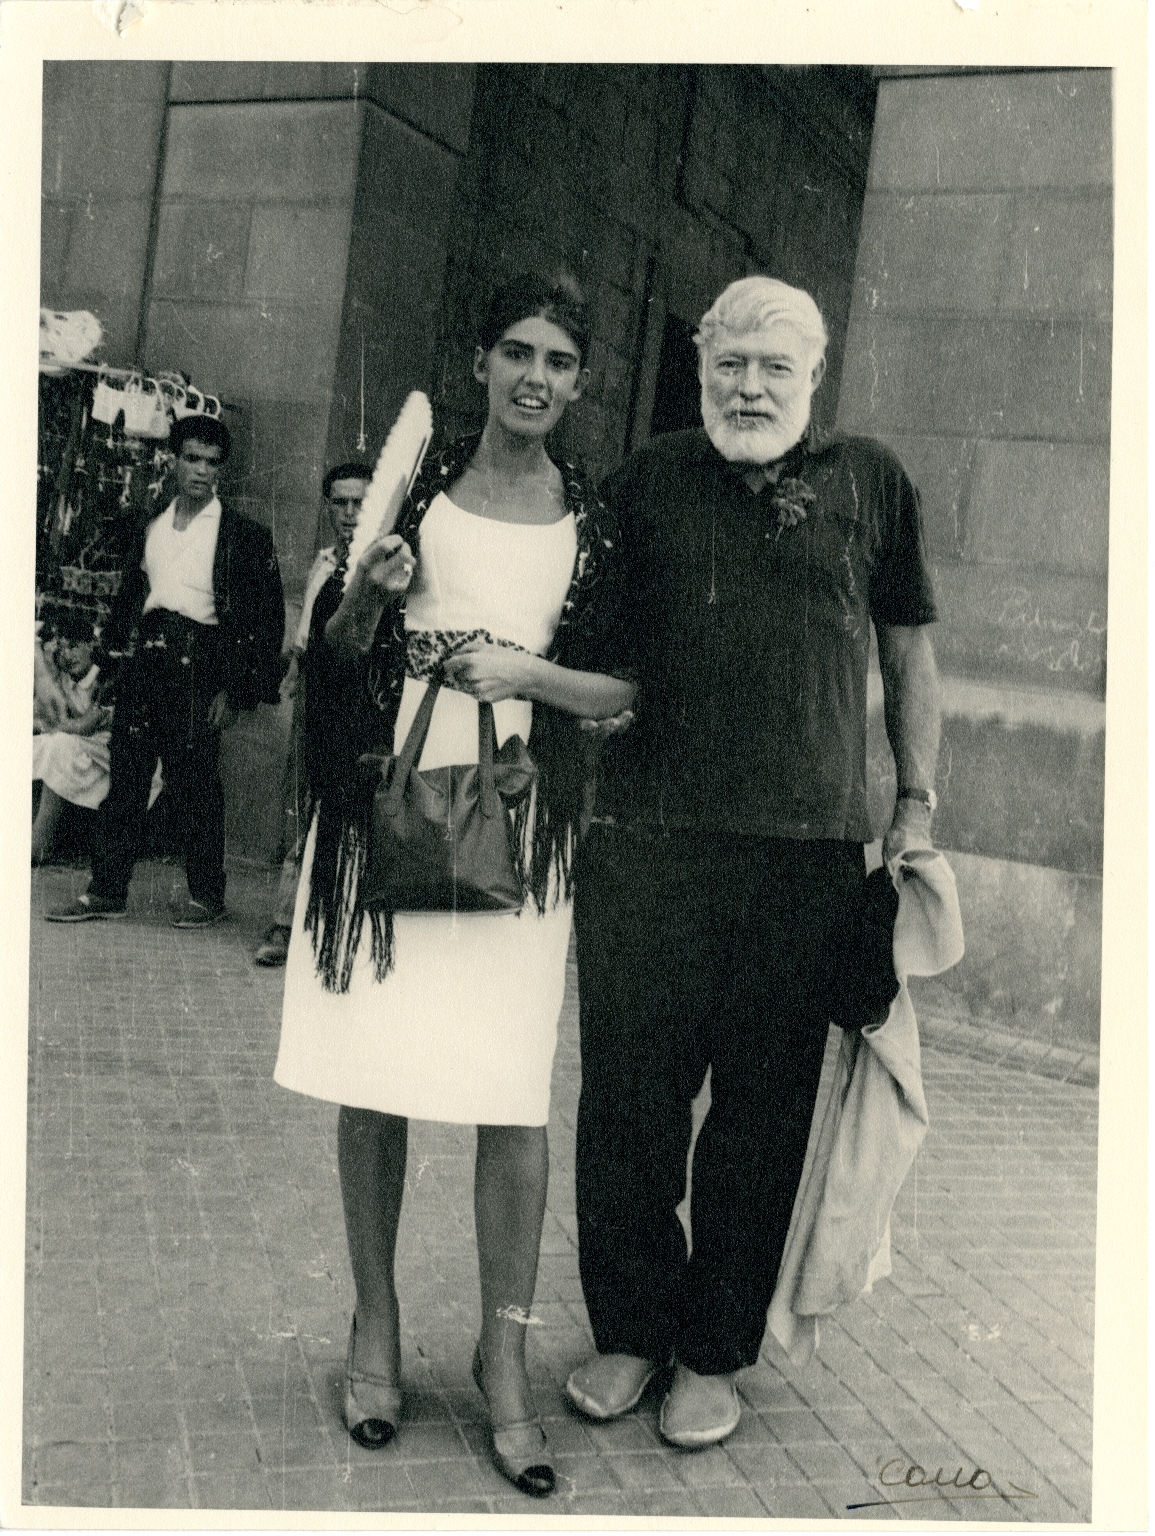 Hemingway with Woman in Spanish Clothing